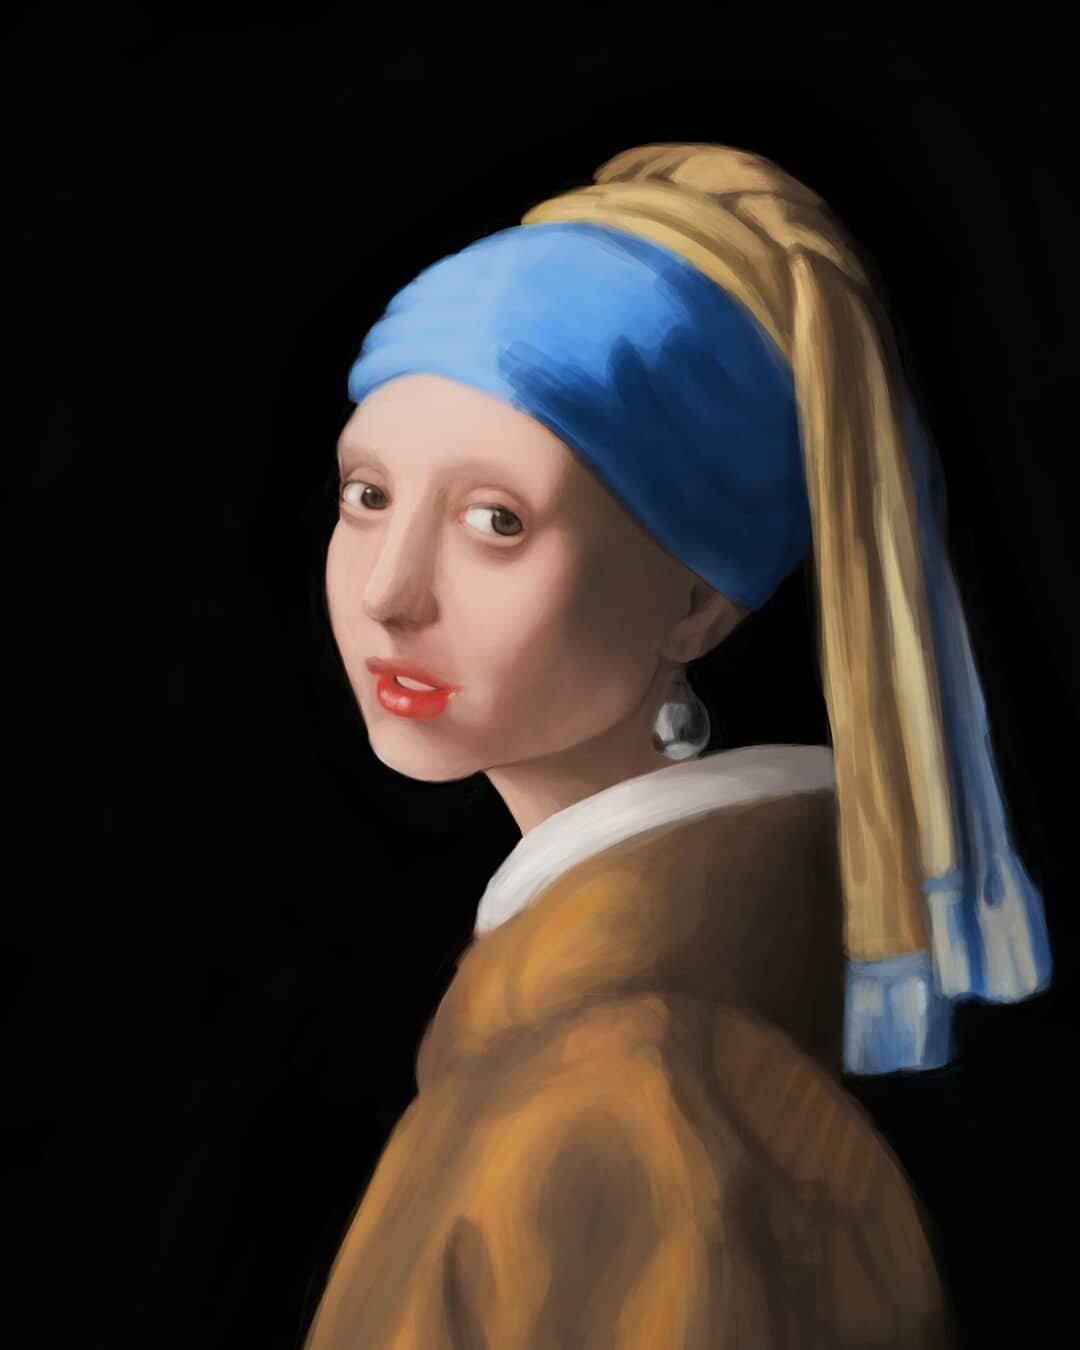 I finally finished this digital painting master study of &quot;Girl with a Pearl Earring&quot; by Johannes Vermeer. Hope you like it! Also, happy International Artist Day!